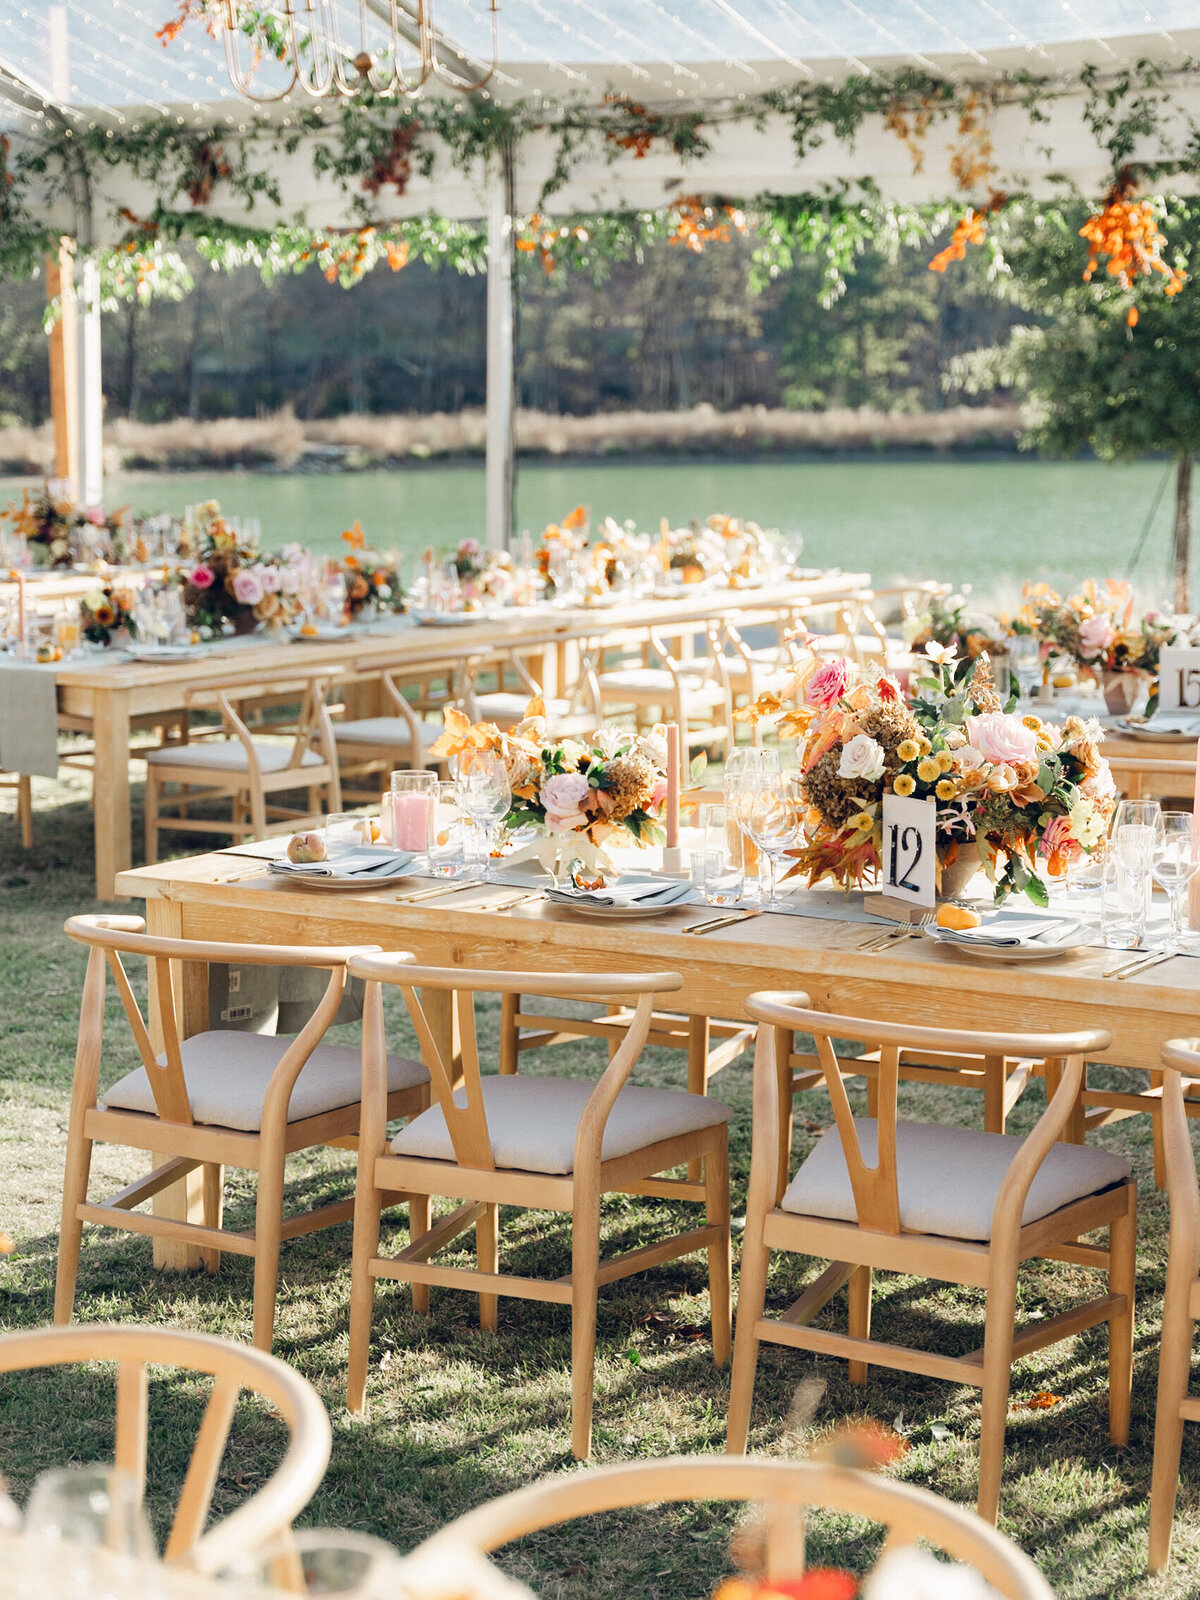 Full tablescapes of fall flowers create lush warm fall setting for wedding reception in Tennessee countryside. Wedding colors in blush, tangerine, mustard yellow, caramel, and honey. Wedding fall florals consisting of roses, clematis, ranunculus, brown tulips, and fall foliage. A collection of low centerpieces and accent arrangements create lush floral wedding reception tables with styled fruit place settings. Unique and colorful candles for reception tables in pink, orange, yellow, and gold. Destination floral design by Rosemary & Finch Floral Design in Nashville, TN.